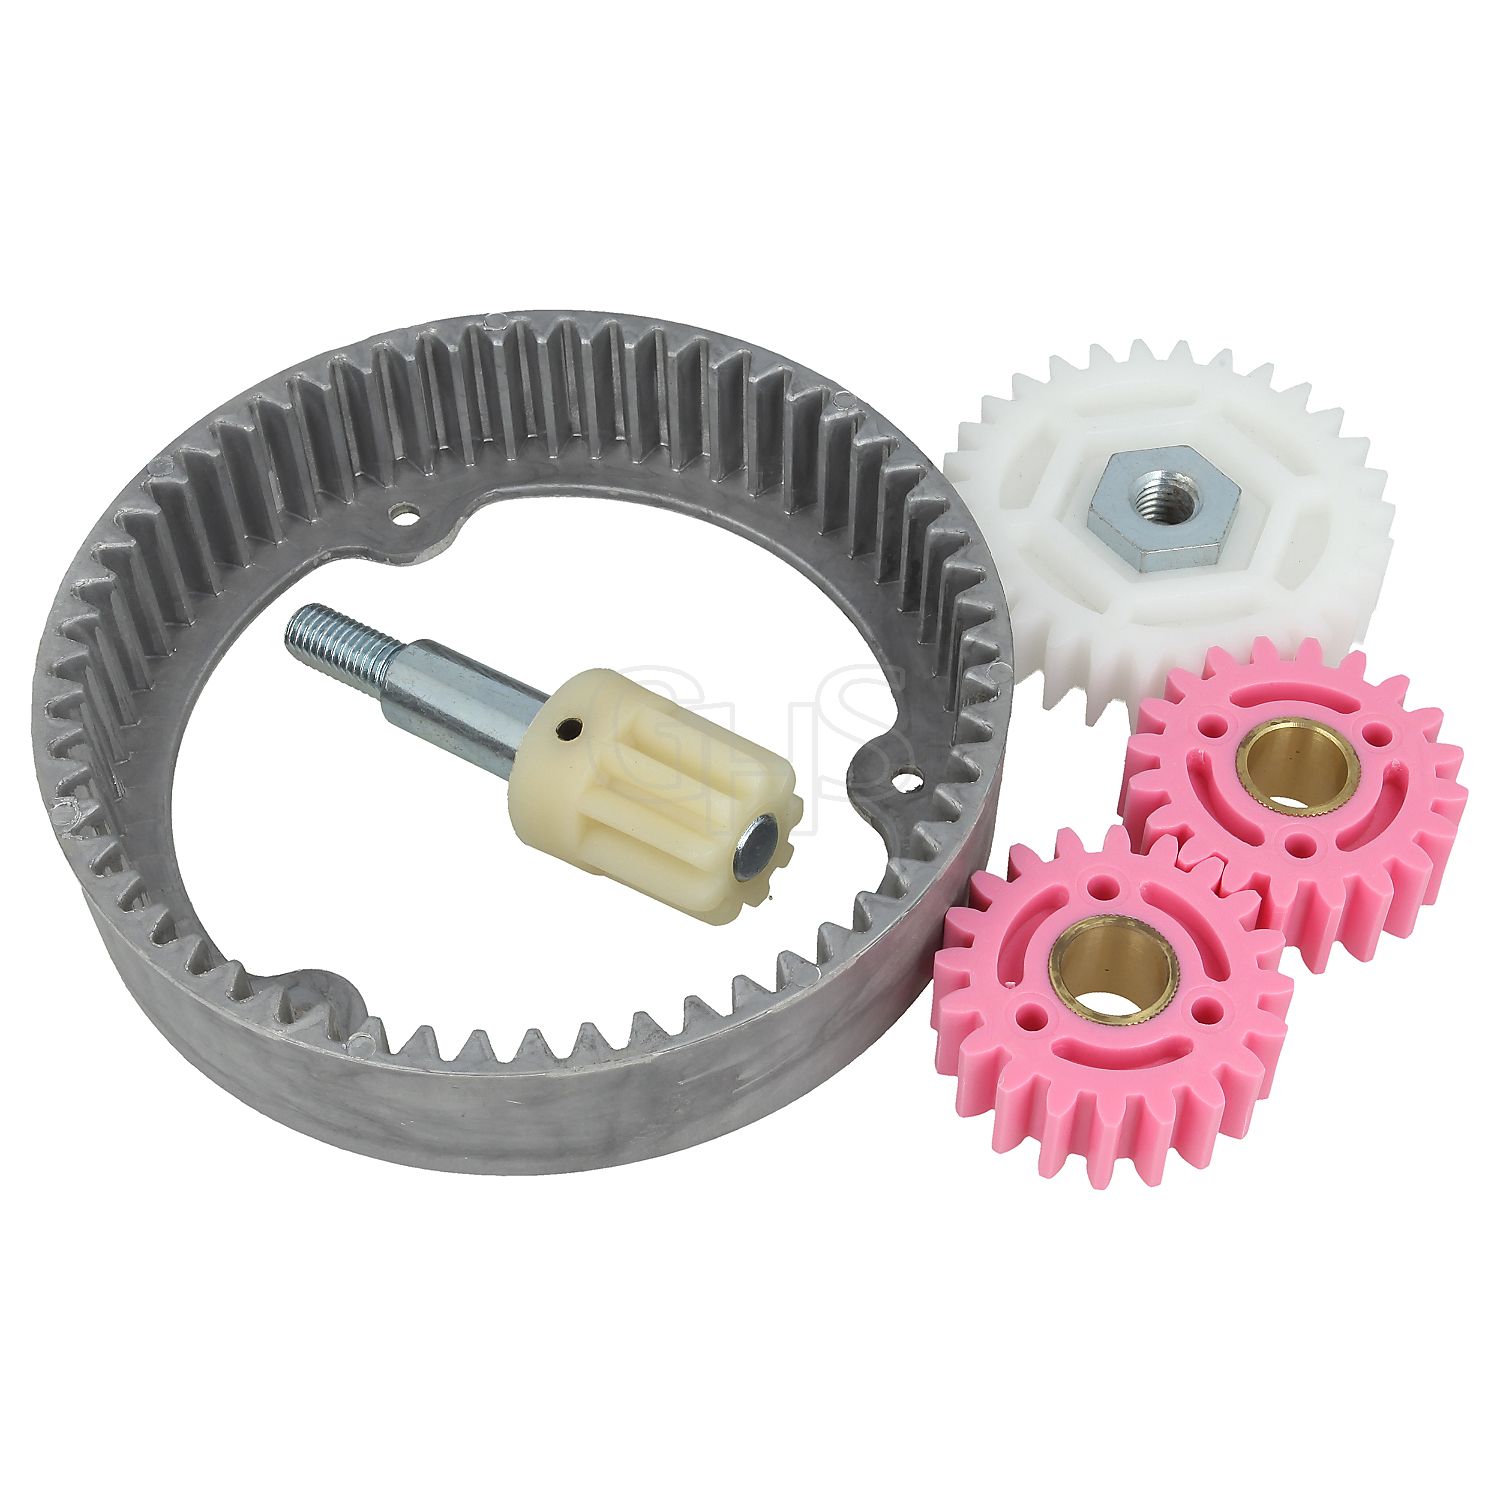 Drive Gear fits Atco-Qualcast QX System-Suffolk Punch-Atco Balmoral F016102379